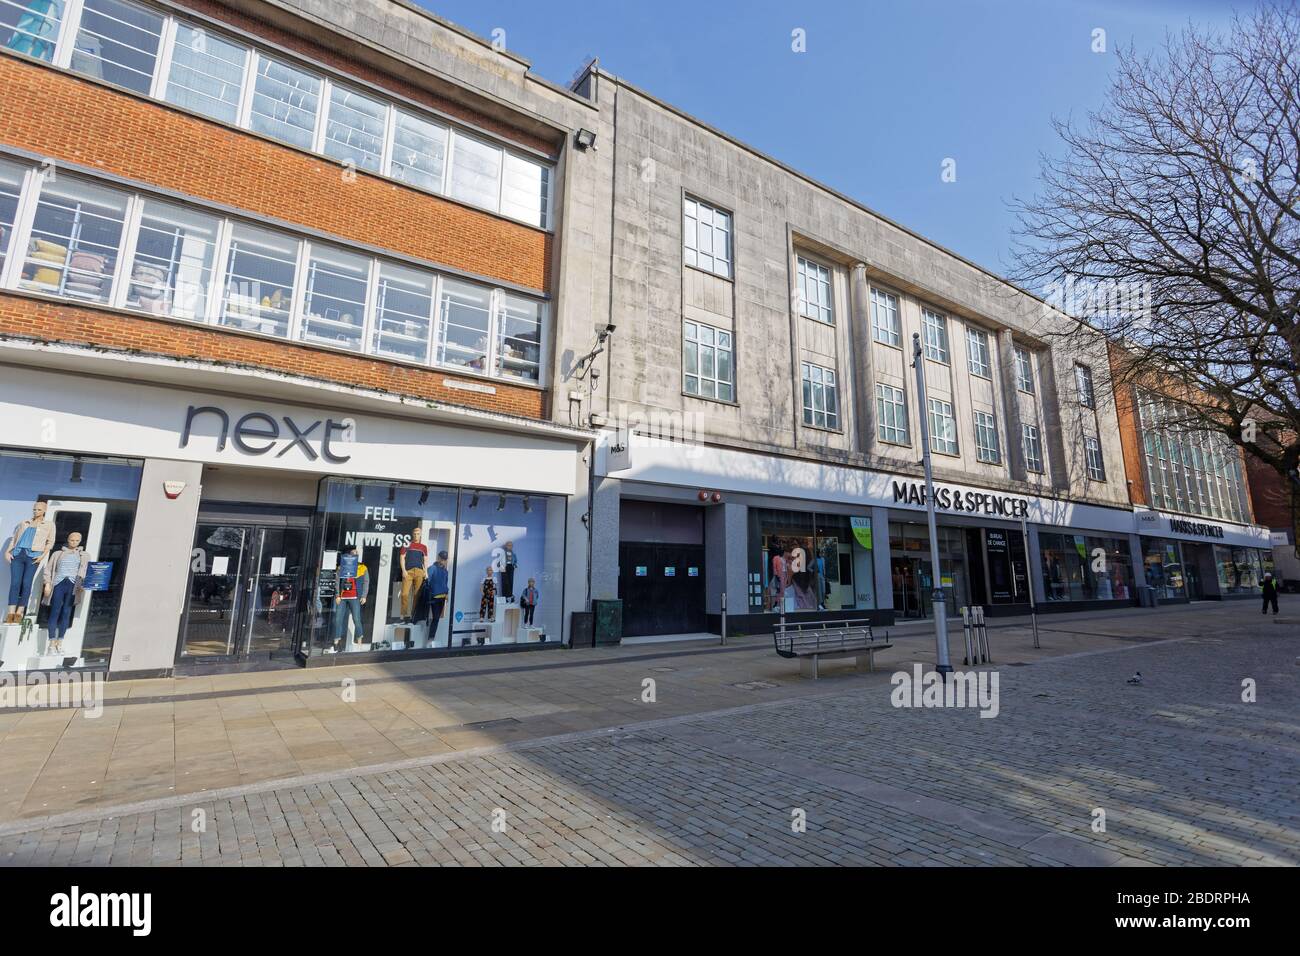 Pictured: Oxford Street in the deserted Swansea city centre, Wales, UK. Tuesday 24 March 2020 Re: Covid-19 Coronavirus pandemic, UK. Stock Photo